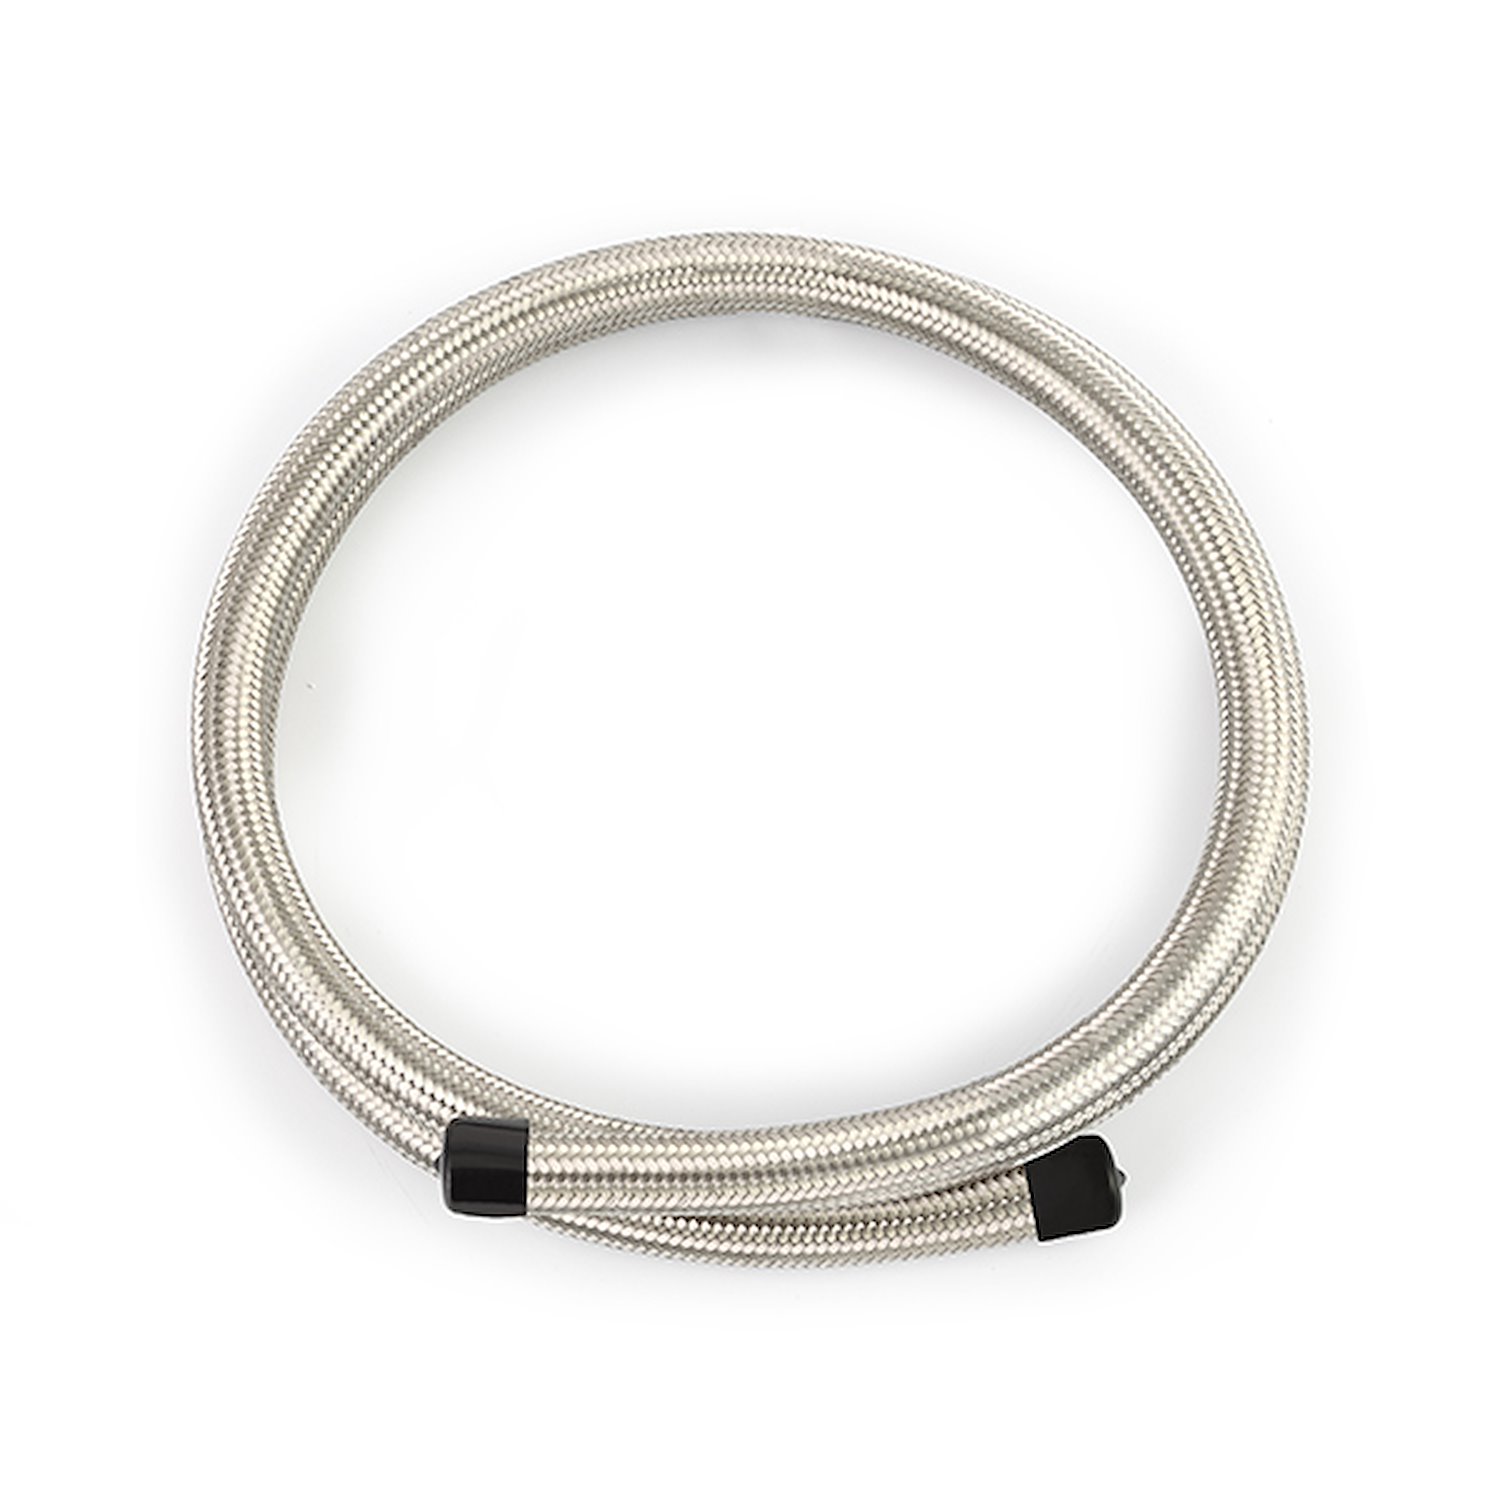 10AN 6FT. HOSE STAINLESS